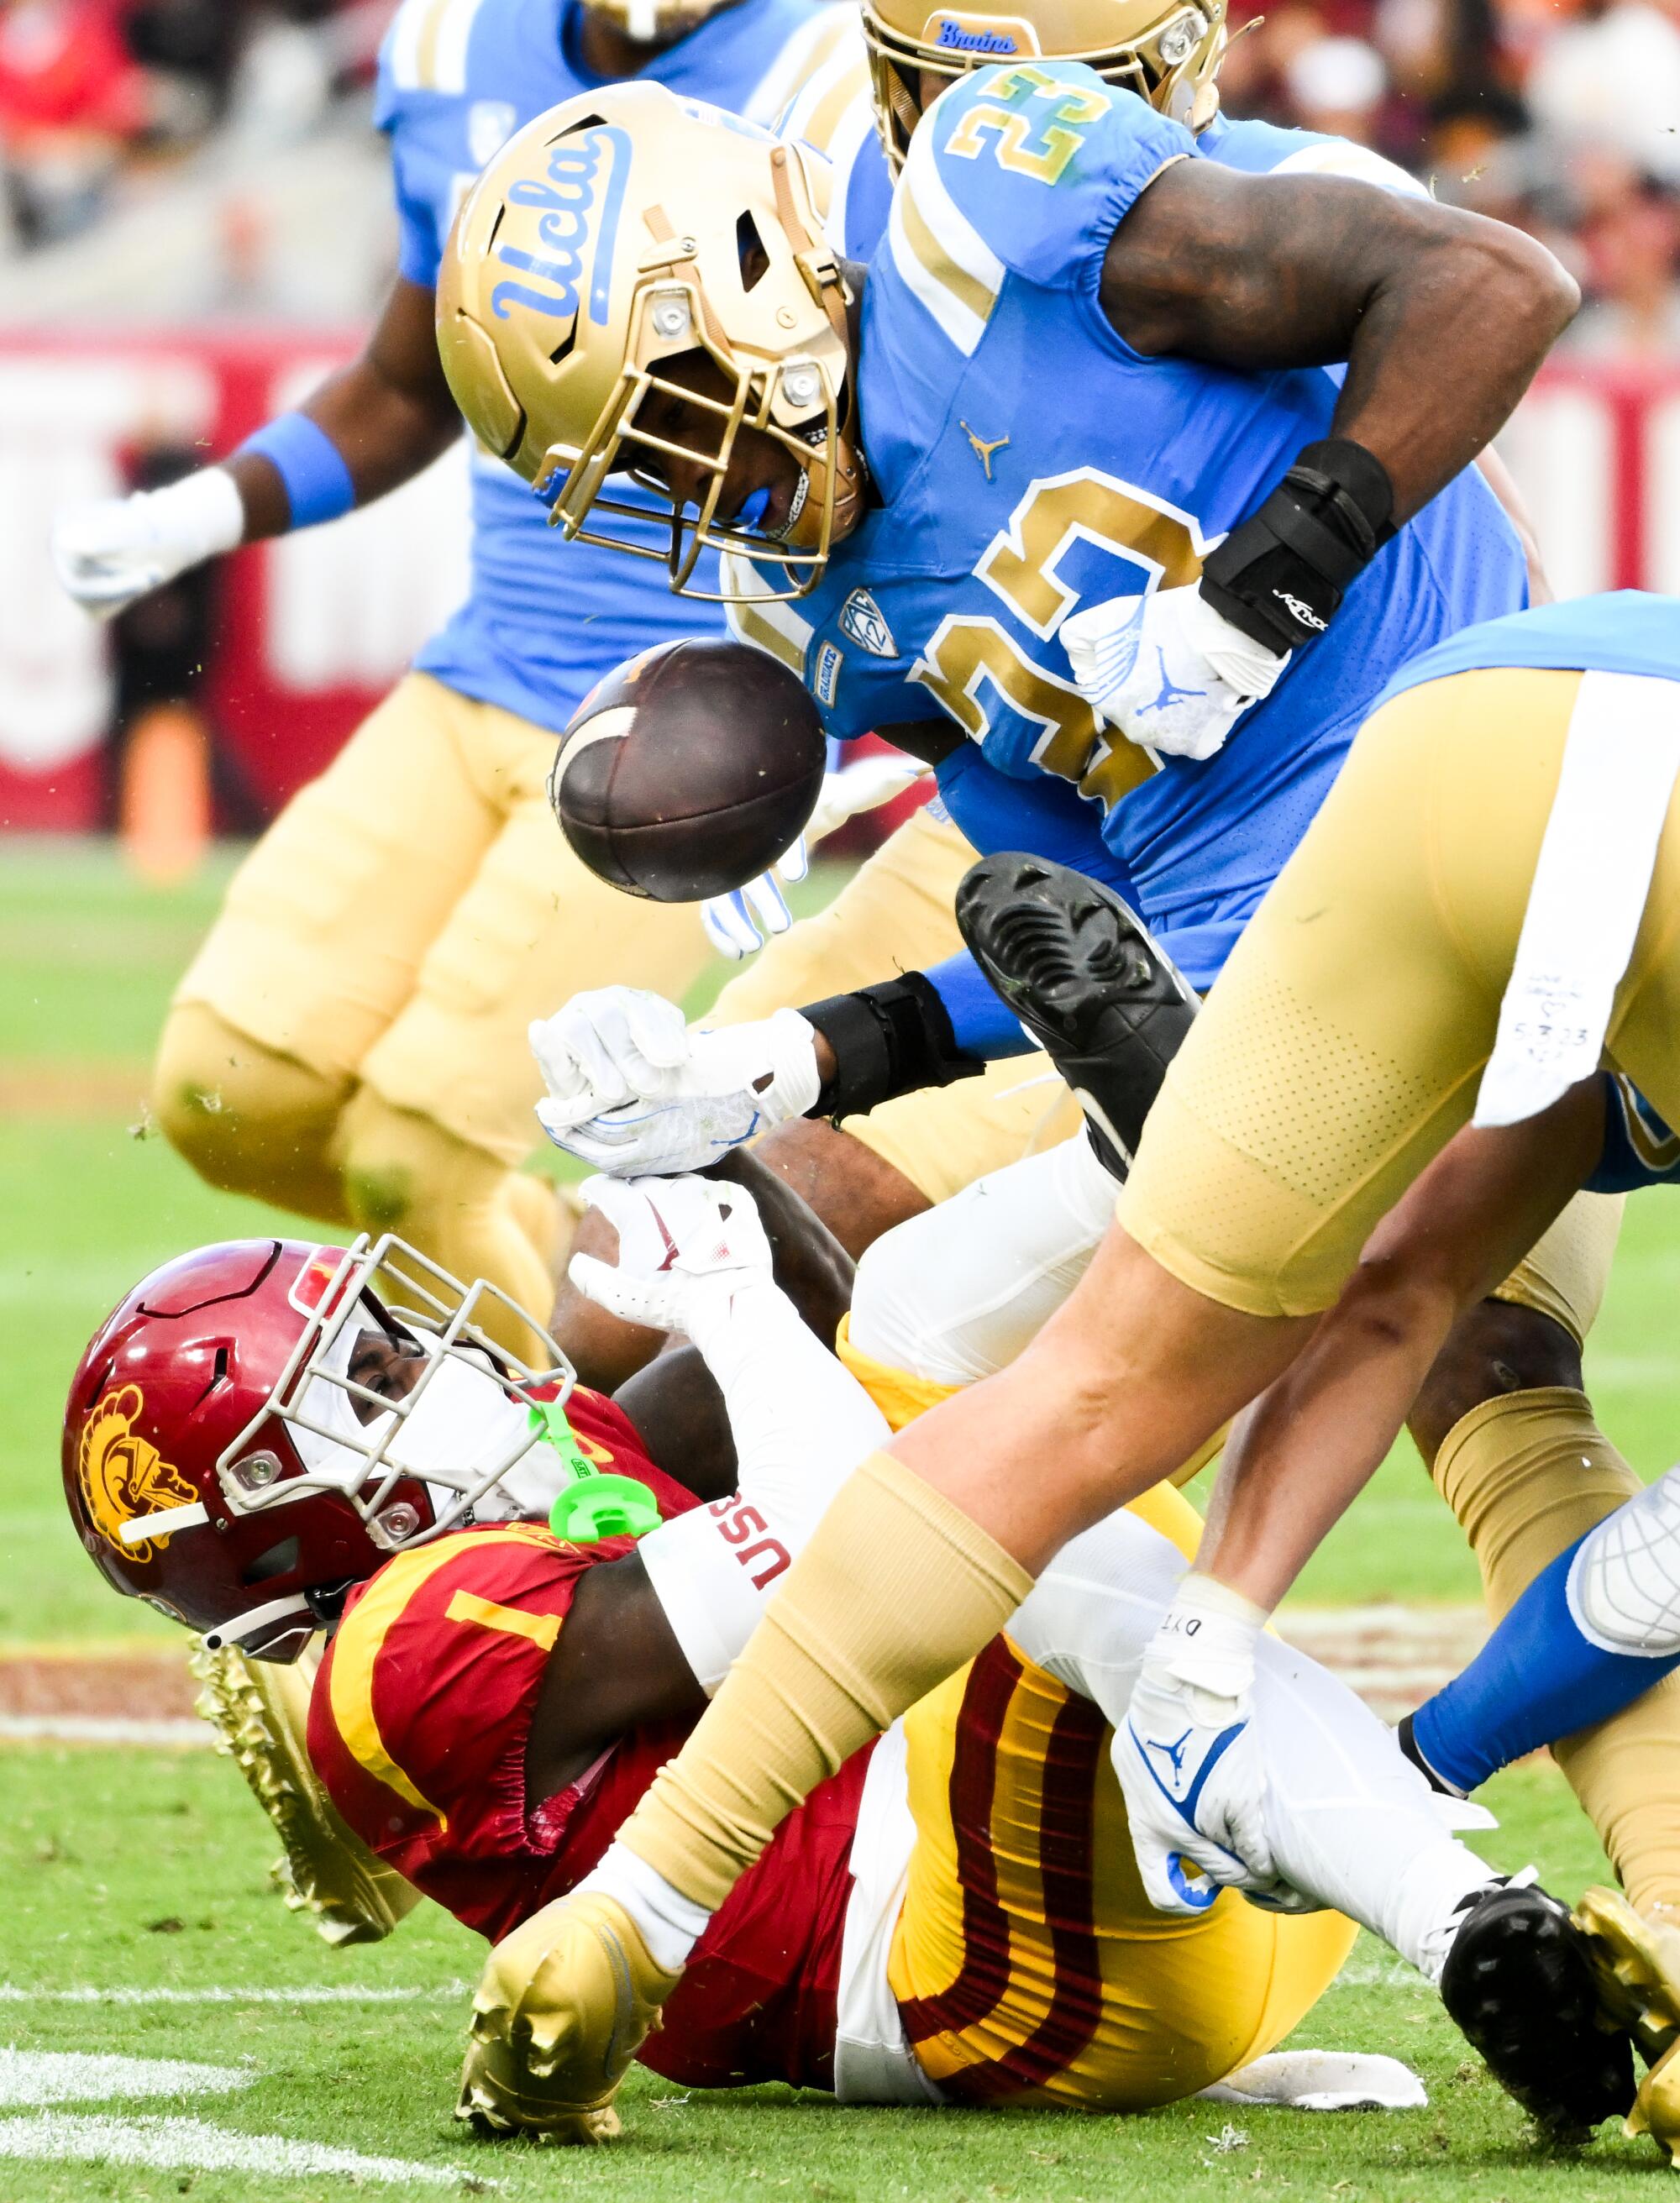 UCLA Bruins defensive back Kenny Churchwell III forces a fumble by USC Trojans wide receiver Zachariah Branch 